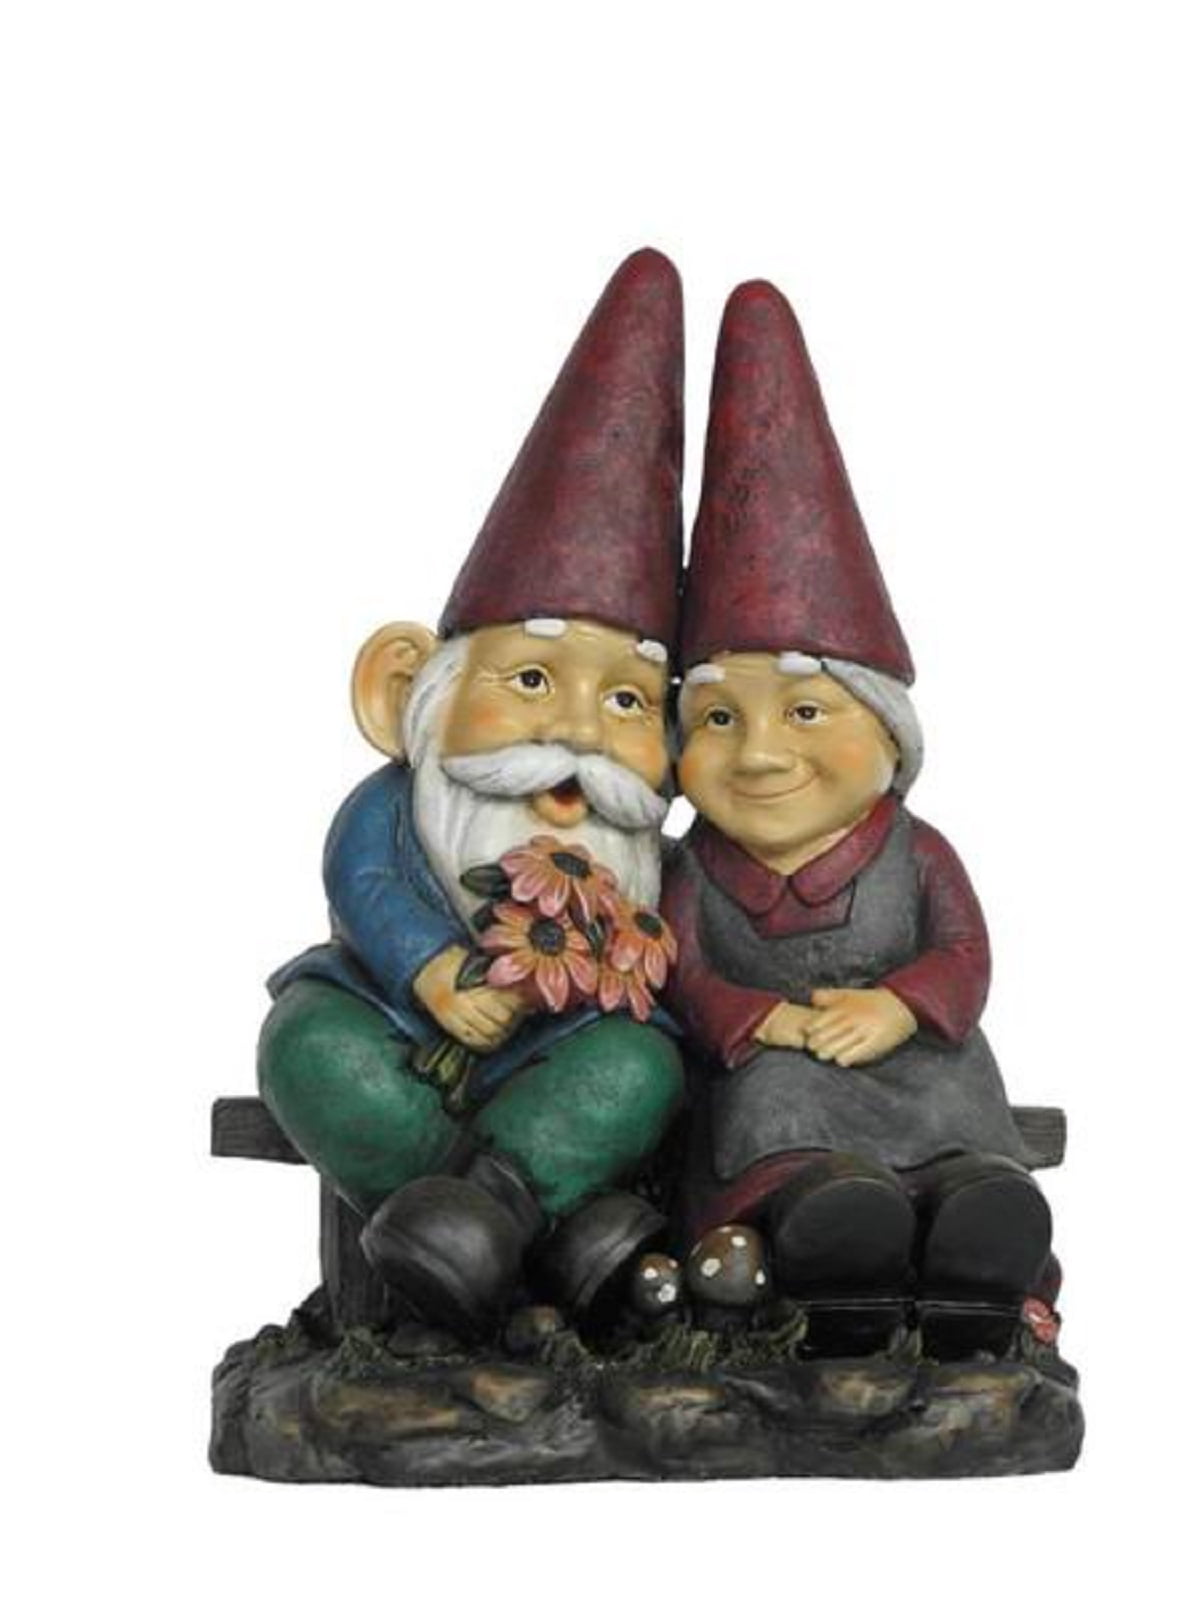 17" Old Gnome Couple On Bench Garden Statue Decoration - Walmart.com